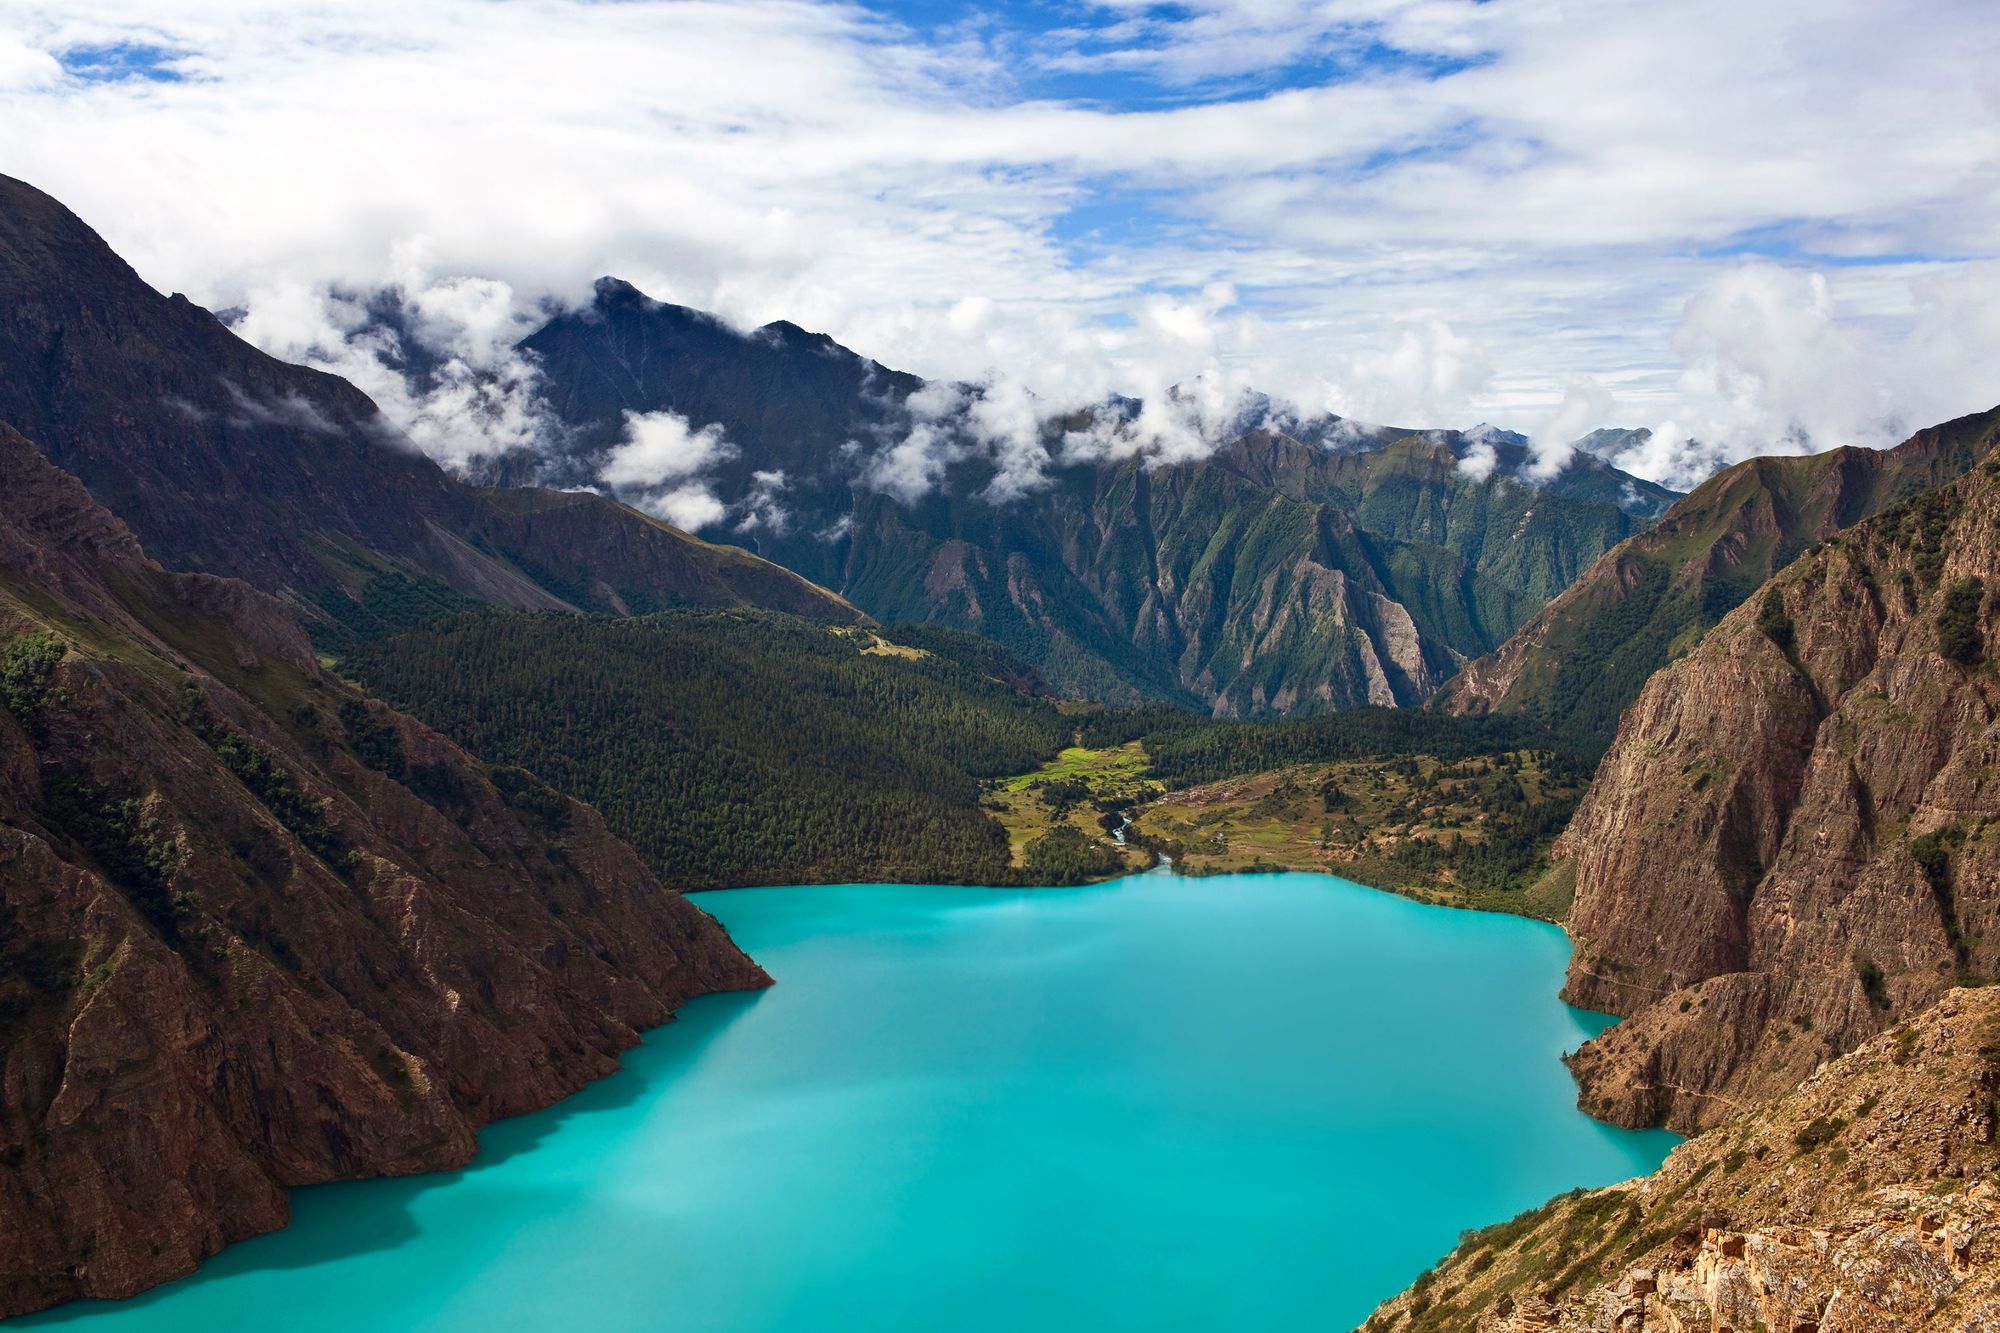 The remarkable turquoise blue colour of Lake Phoksundo, surrounded by mountains and forest on every side. It's a must see if trekking in the far west of Nepal. 